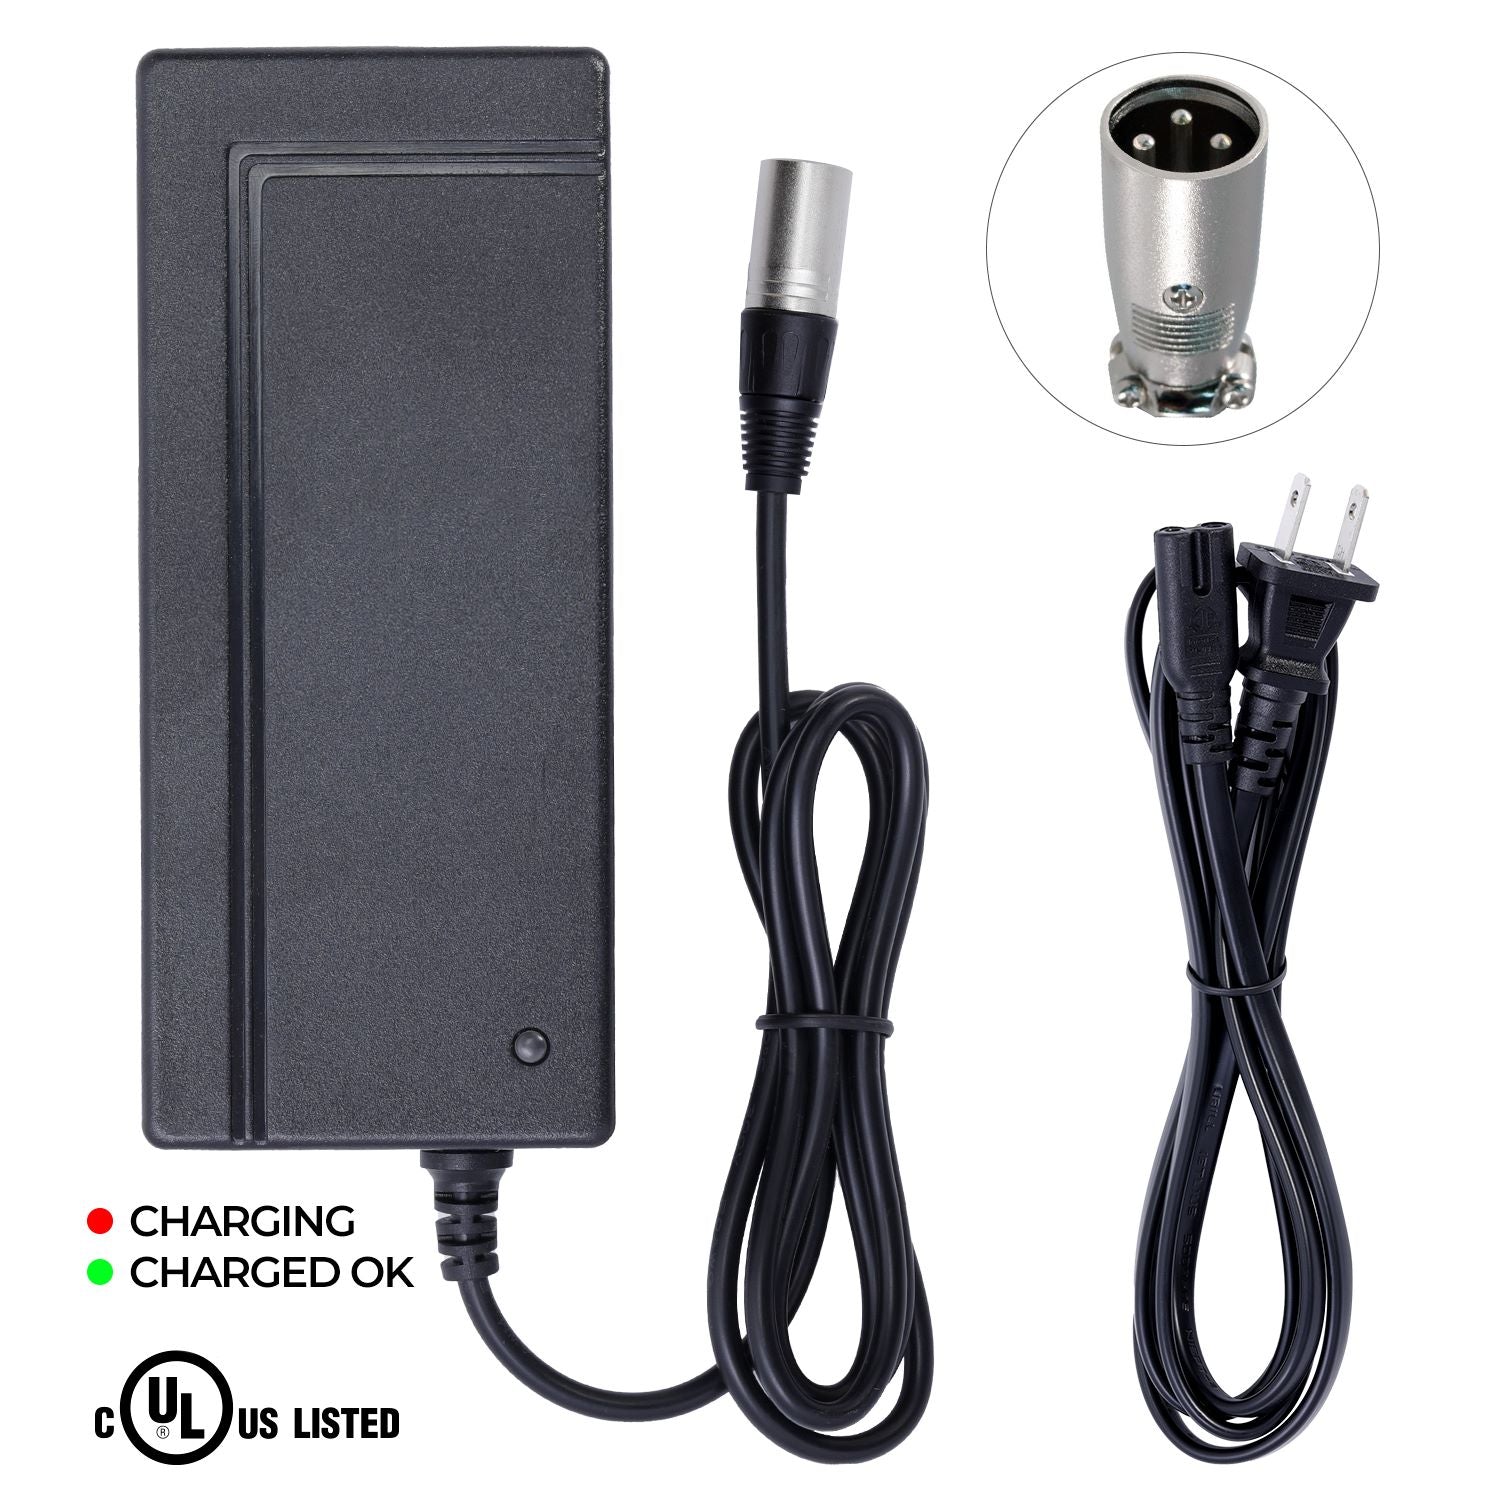 Charger for Mongoose Rocket FS Electric Scooter